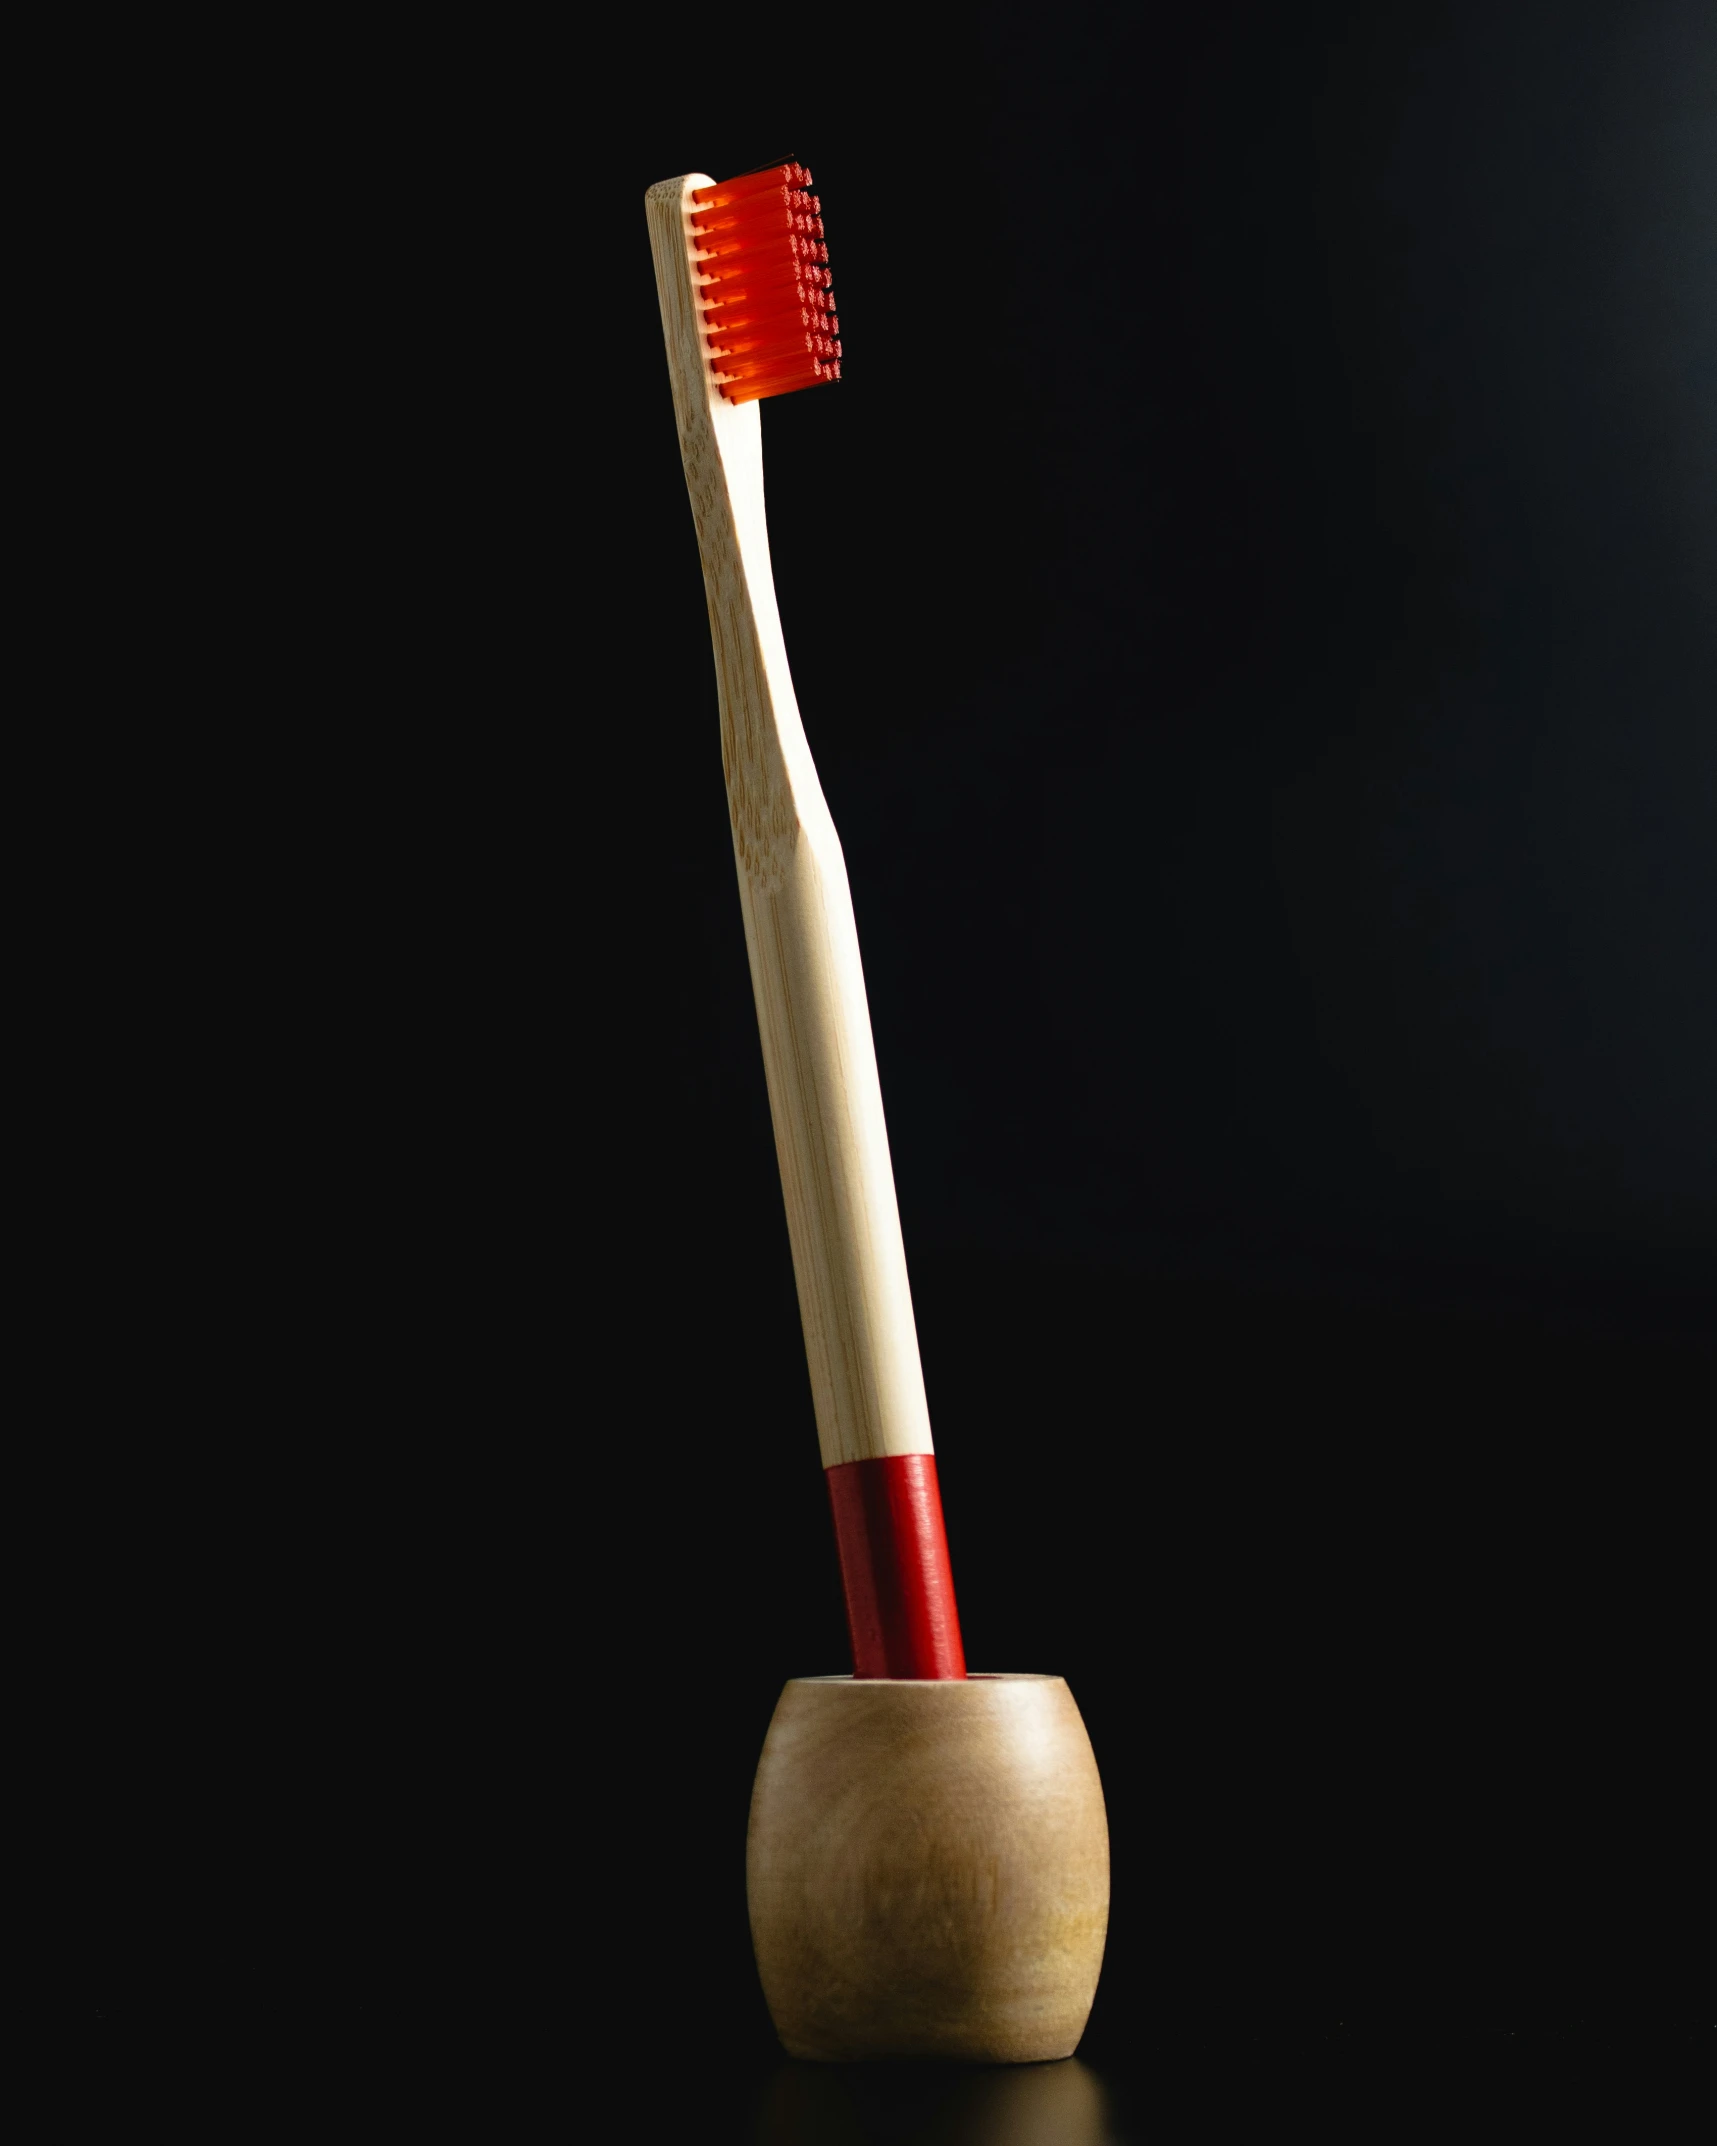 two toothbrushes on a wooden stand that has red and white stripes on it